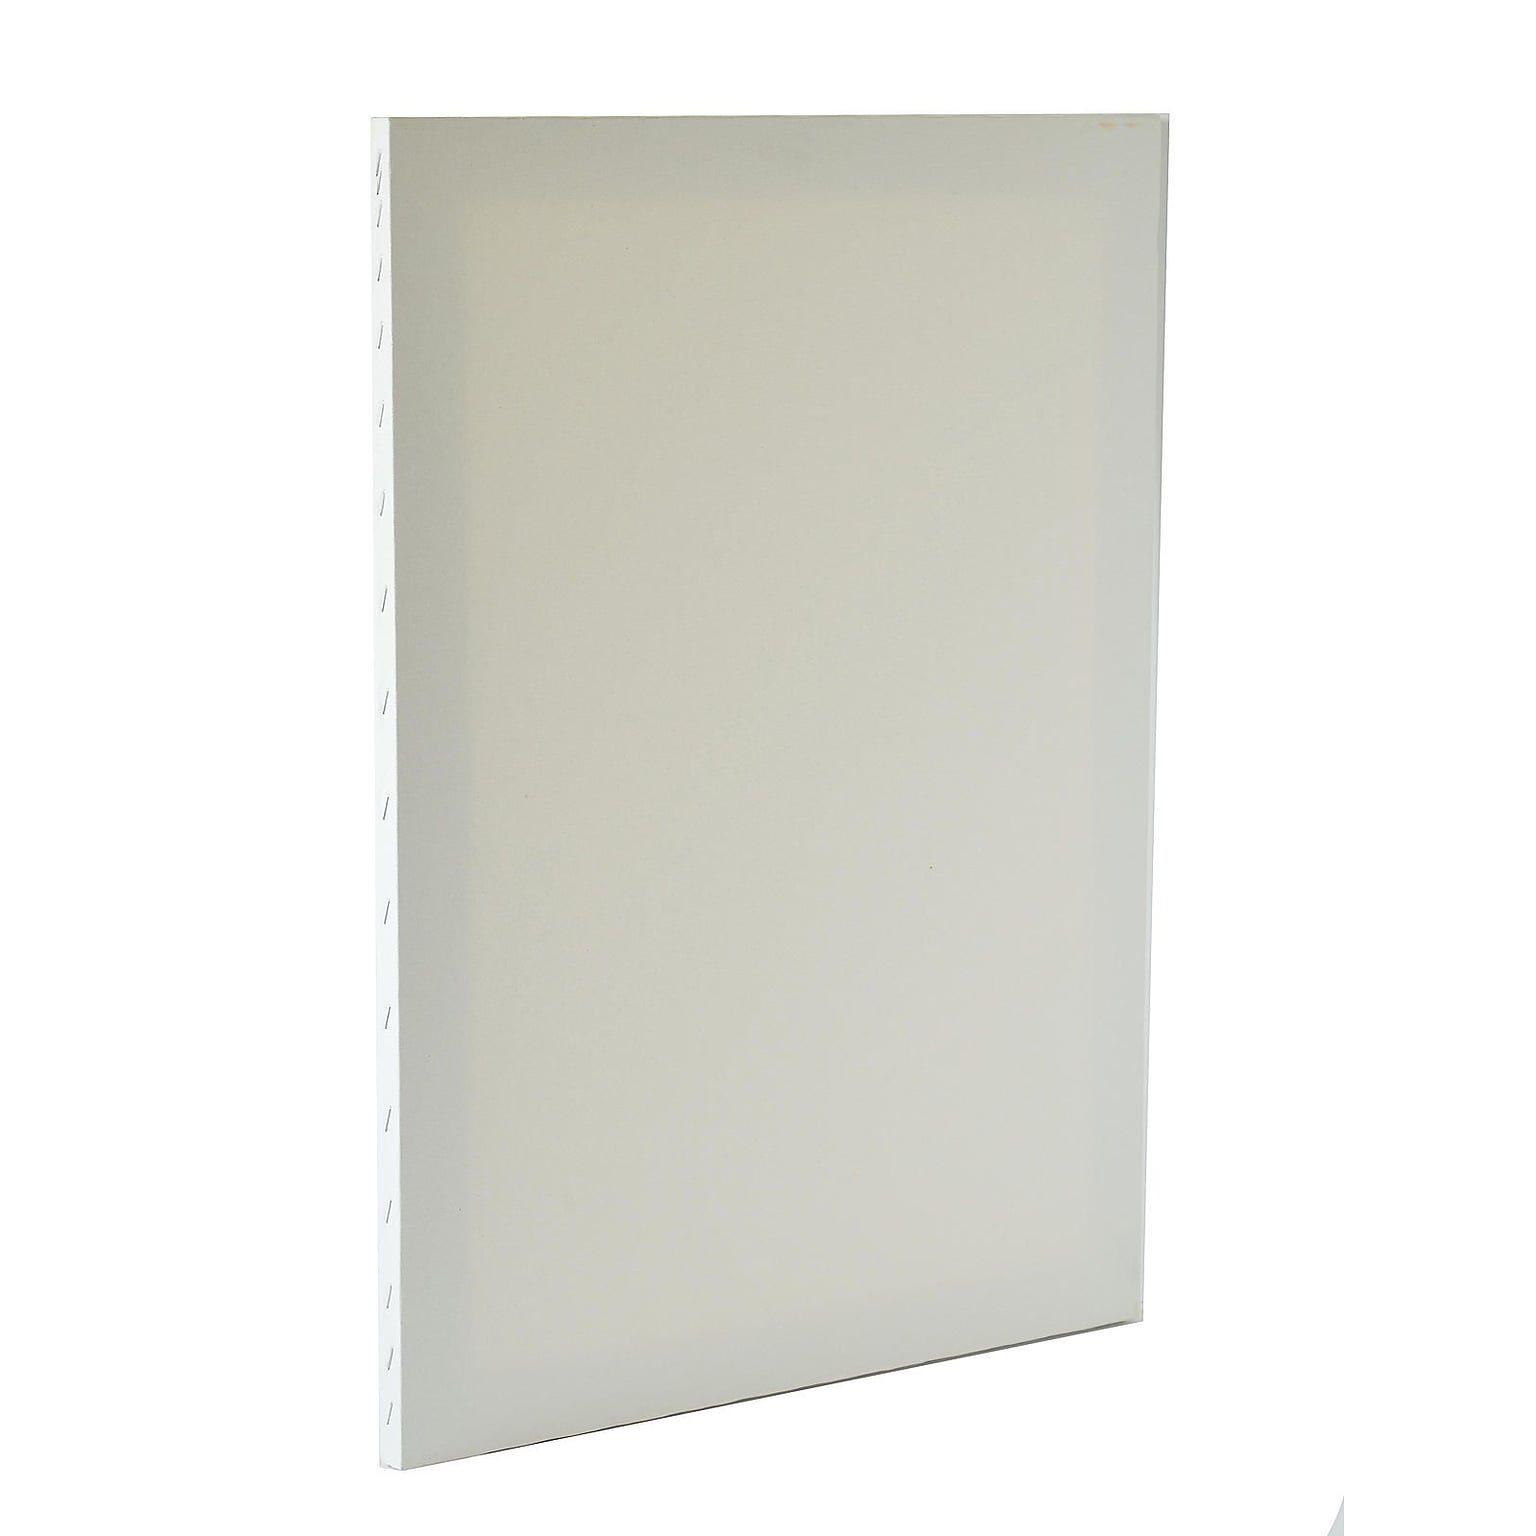 Discovery Economy Stretched Canvas 24 In. X 30 In. Each (TX162430 BULK)